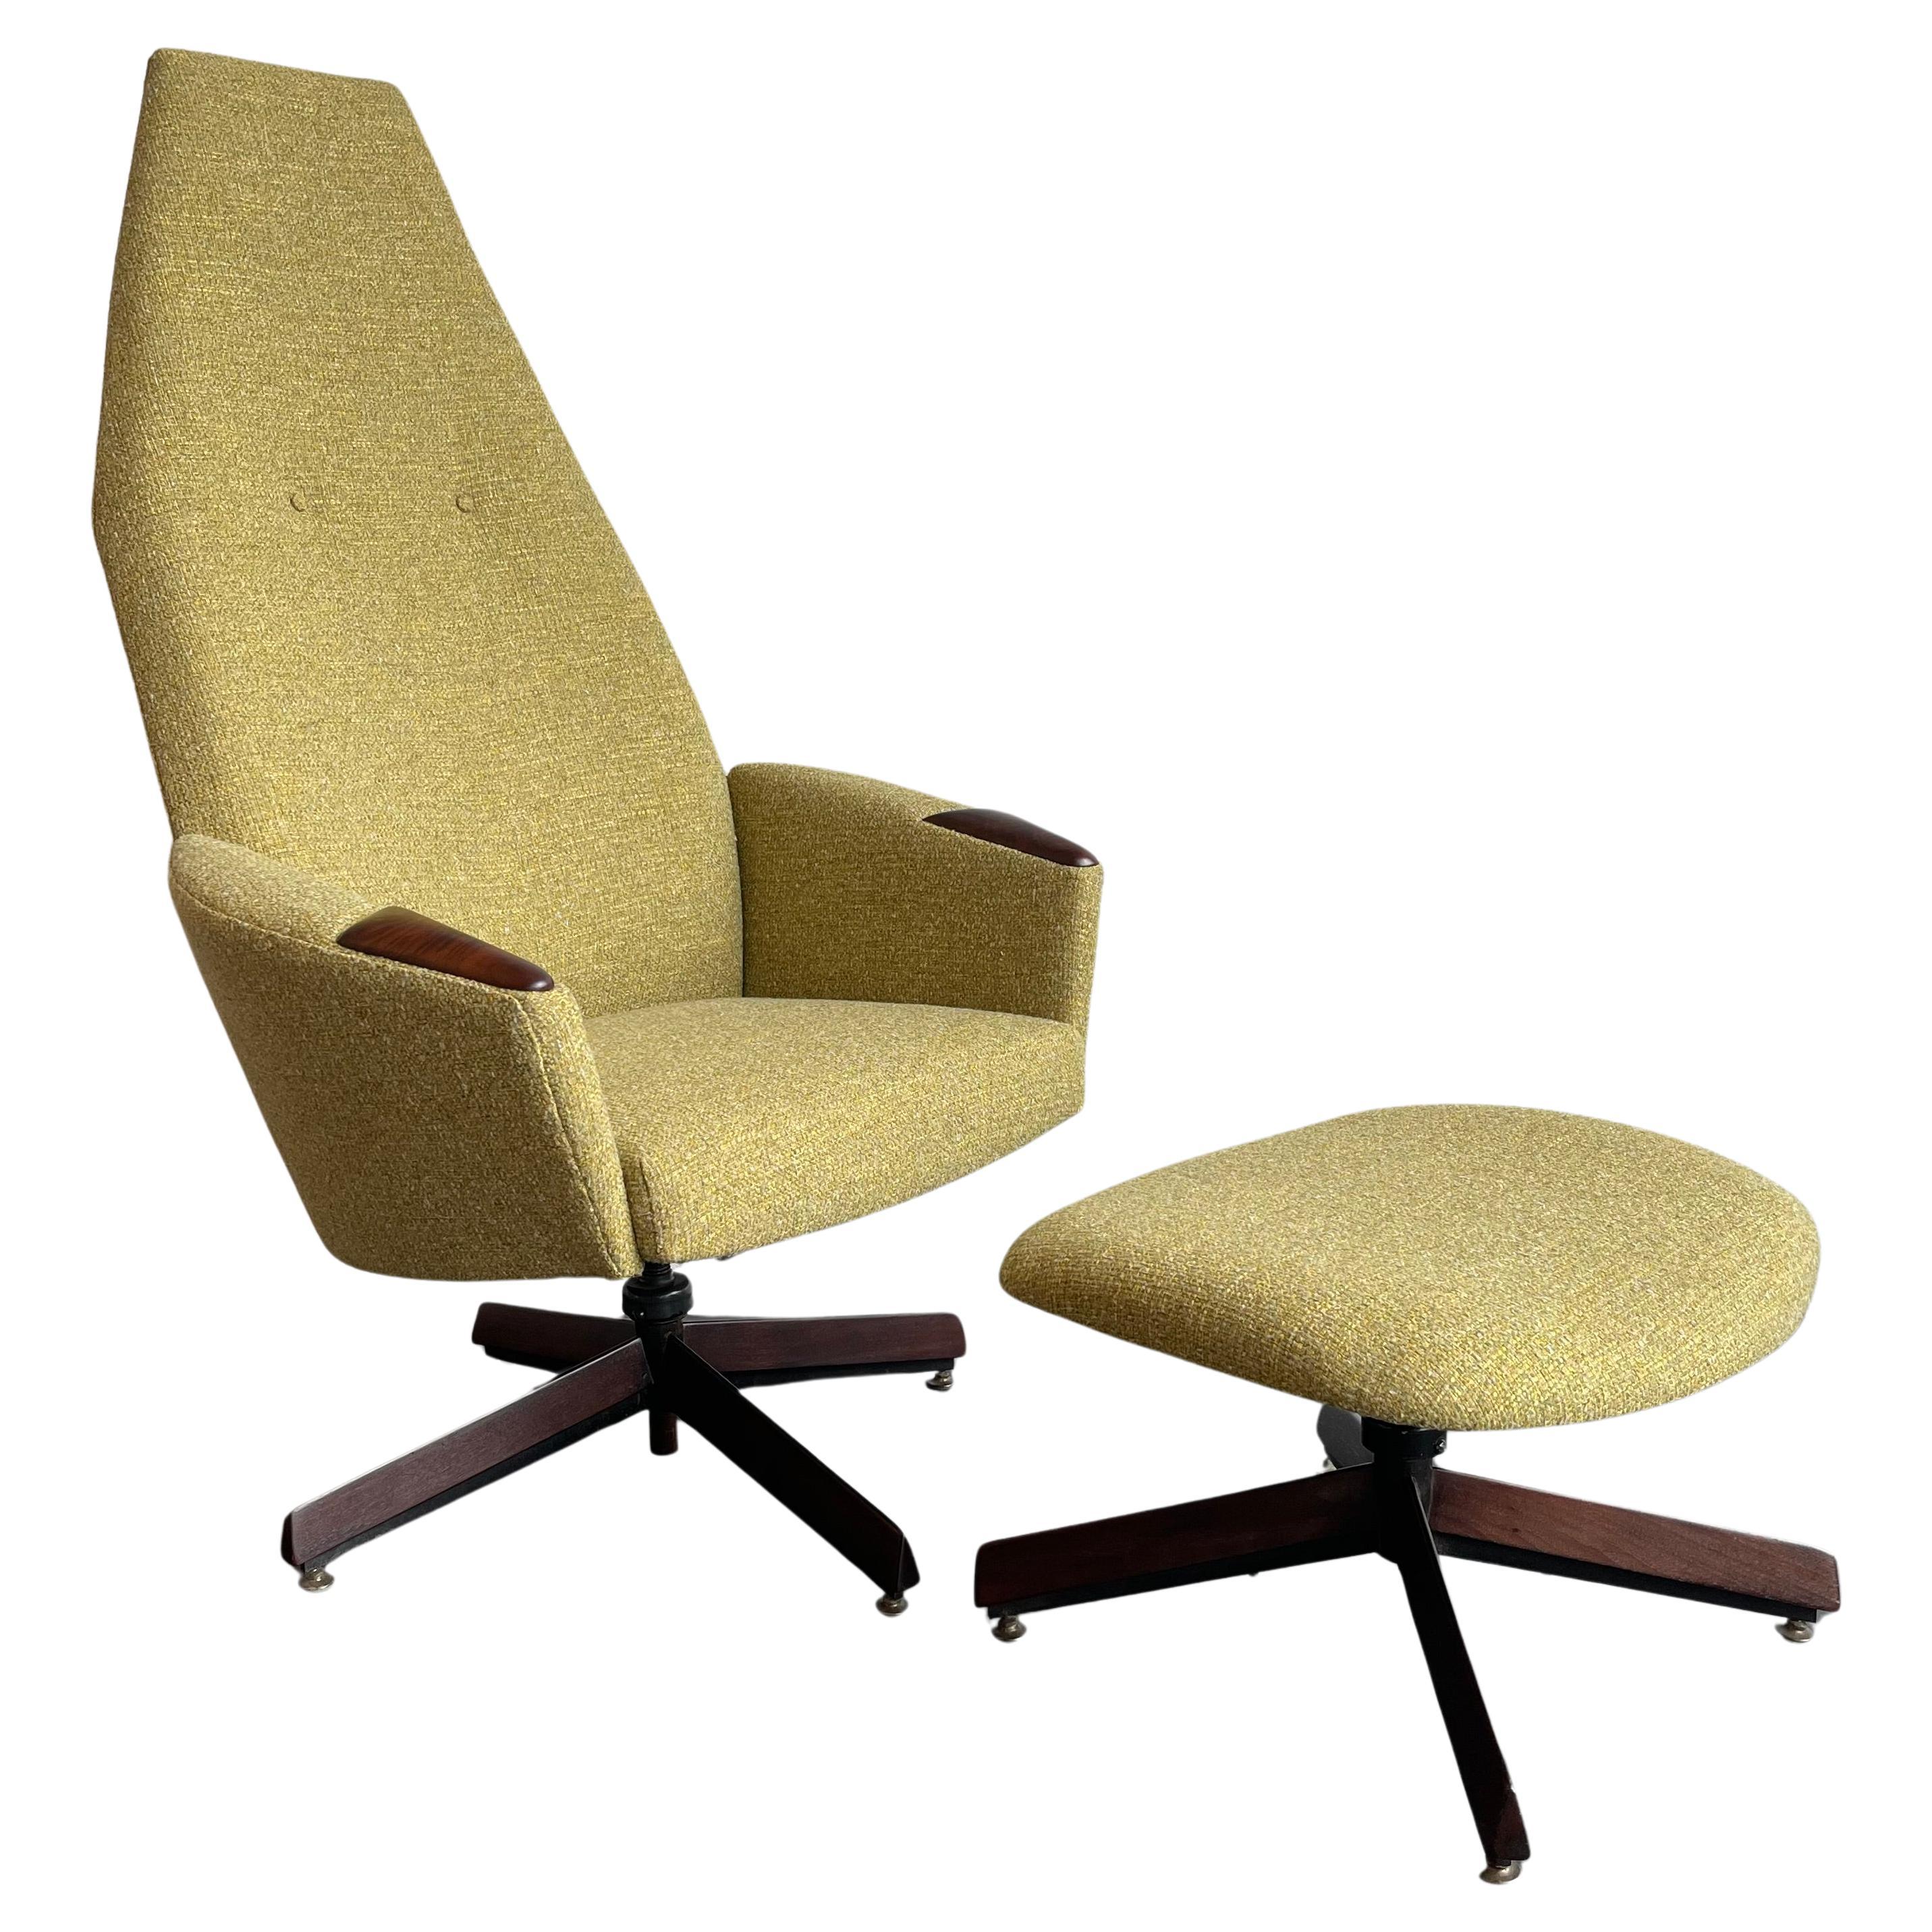 Mid-Century Modern Lounge Chair Ottoman Set By Adrian Pearsall, Craft Associates For Sale